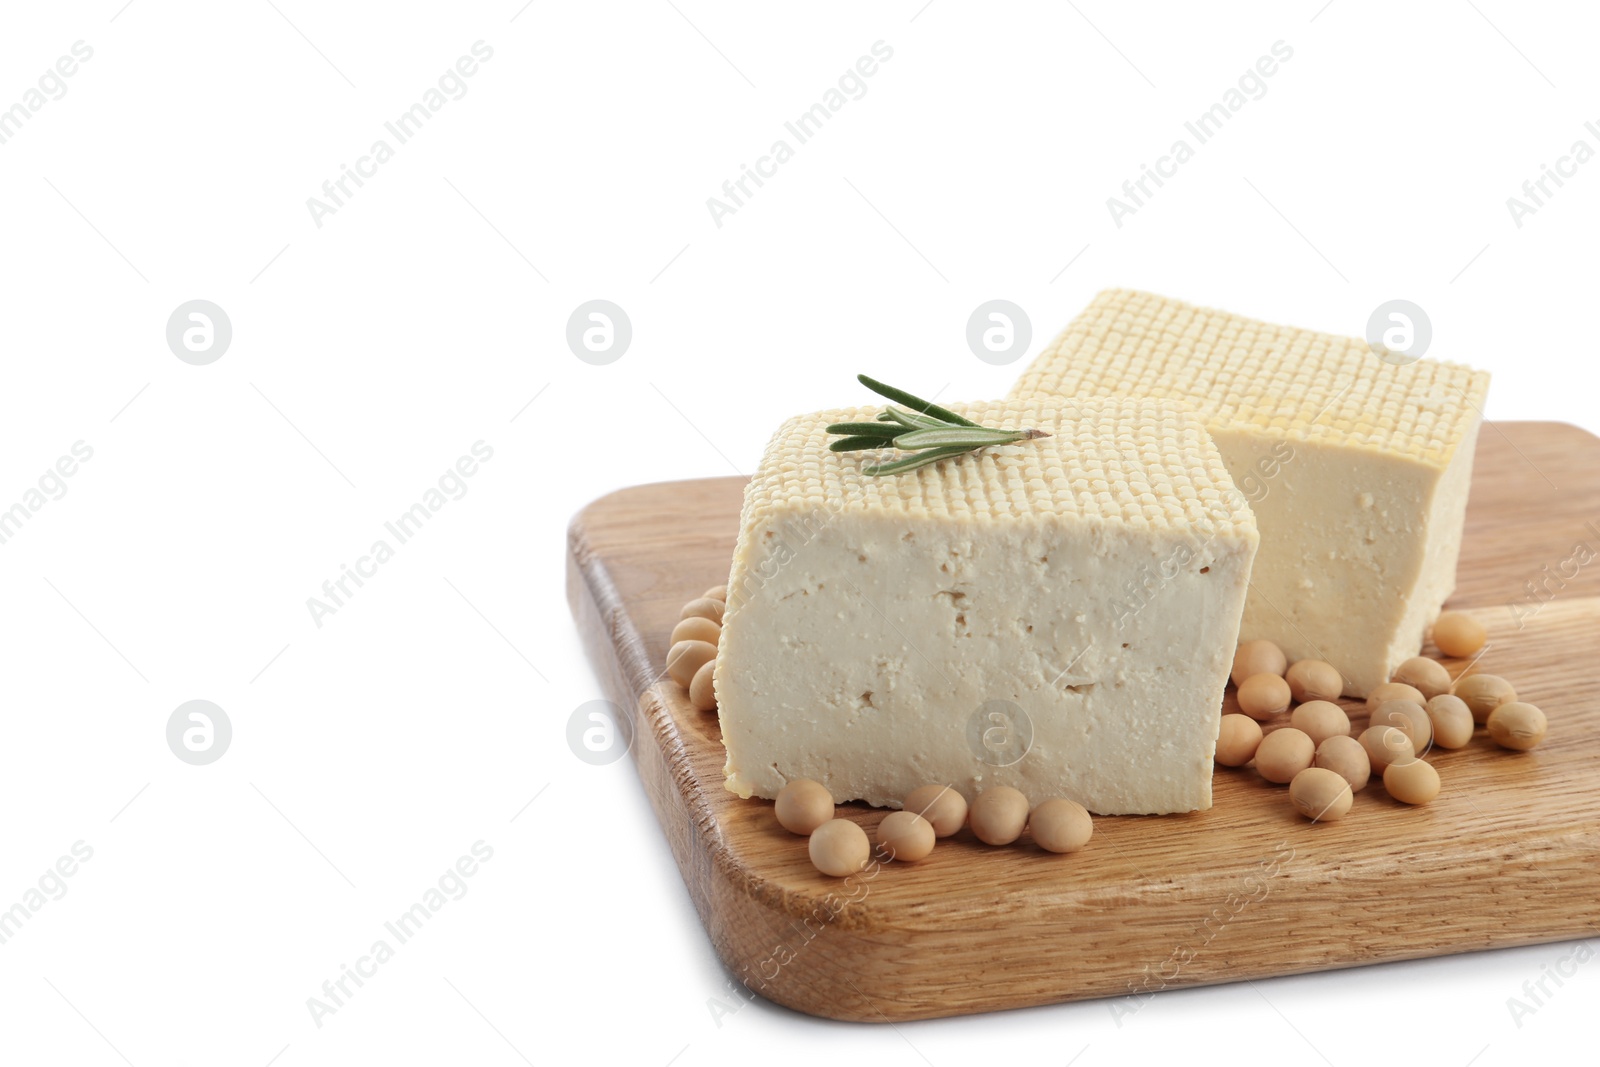 Photo of Pieces of delicious tofu with rosemary and soy on white background